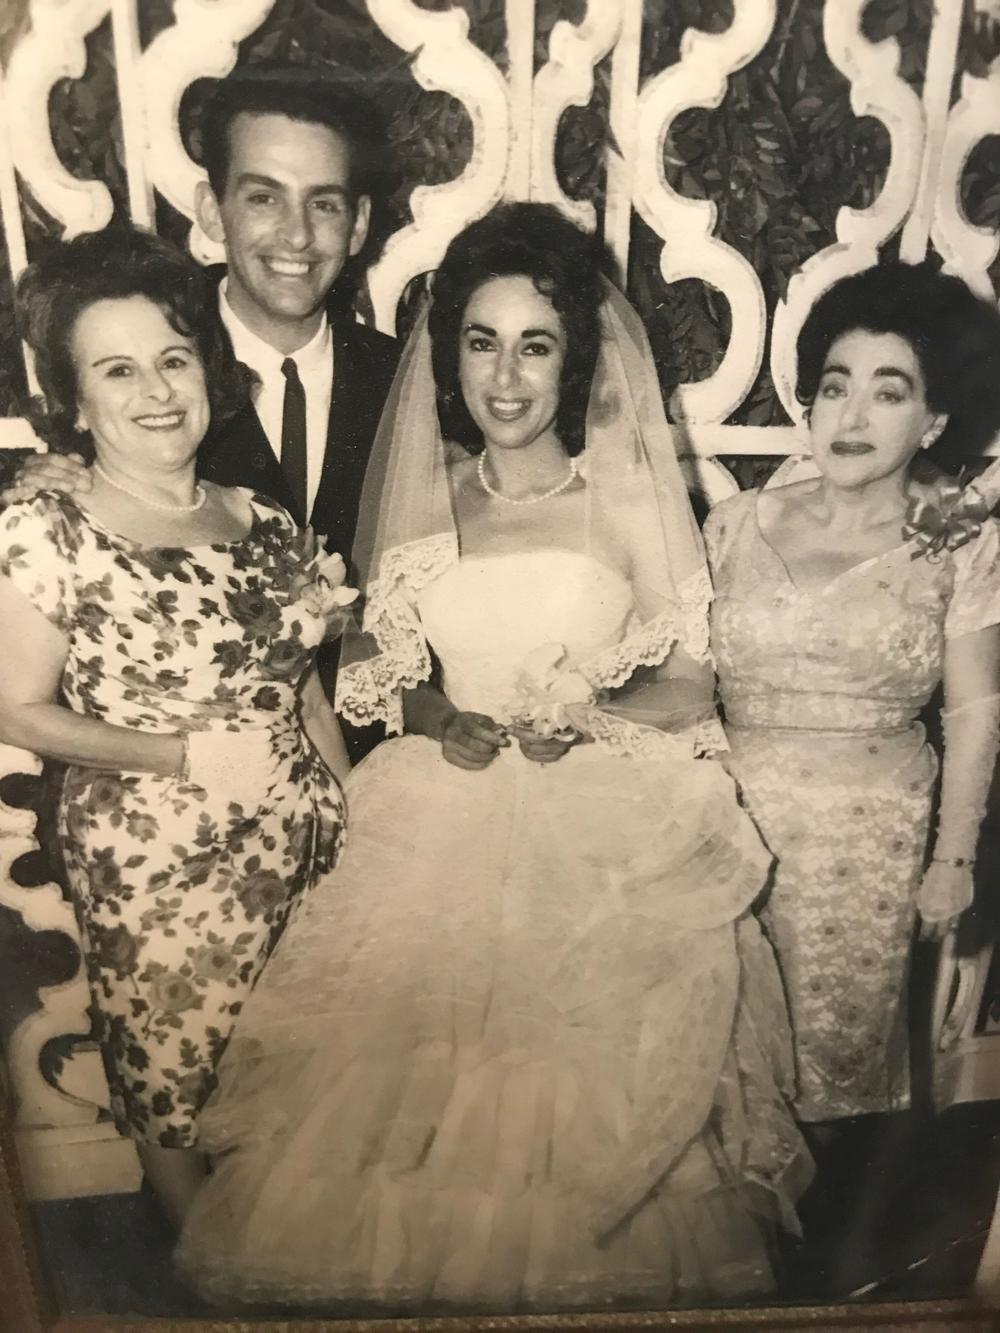 Marty and Elayne on their wedding day accompanied by their moms, Ada Rauch (left) and Rachelle Rosen (right).